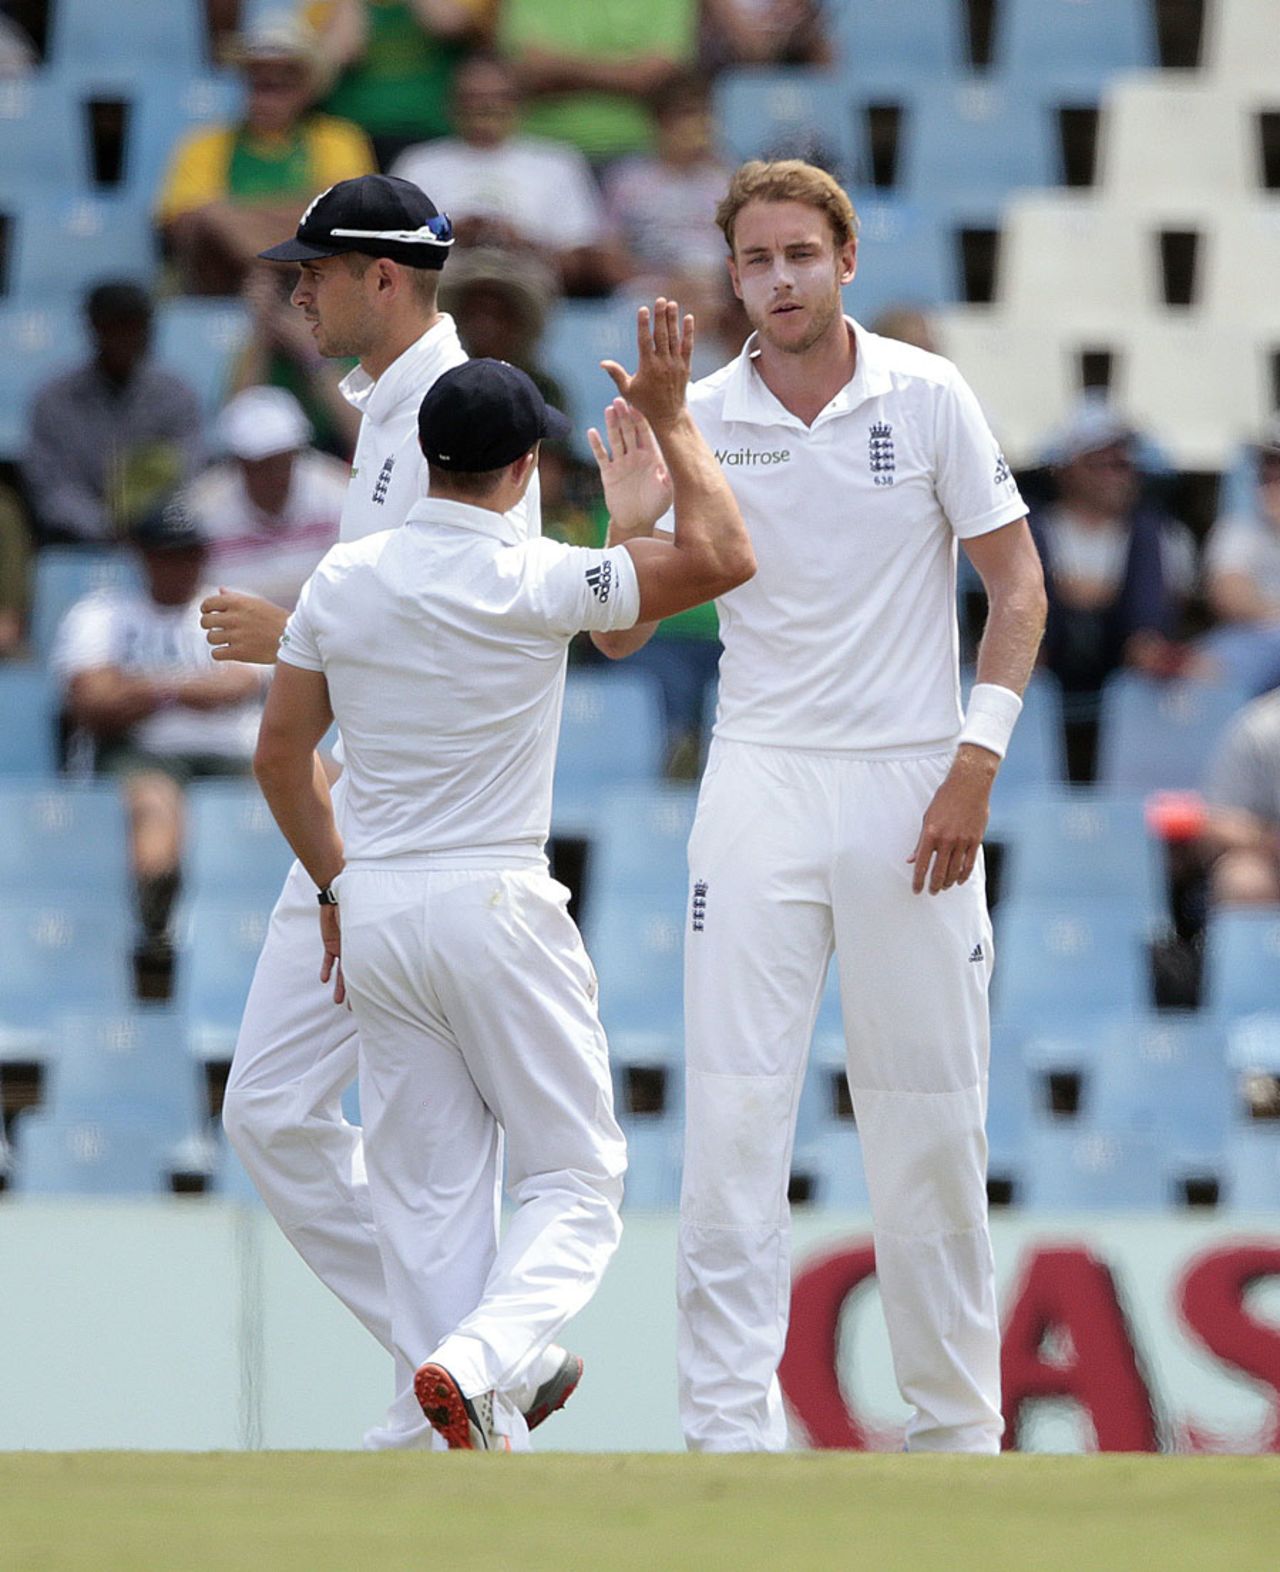 Stuart Broad provided England their first breakthrough of the morning, South Africa v England, 4th Test, Centurion, 2nd day, January 23, 2016